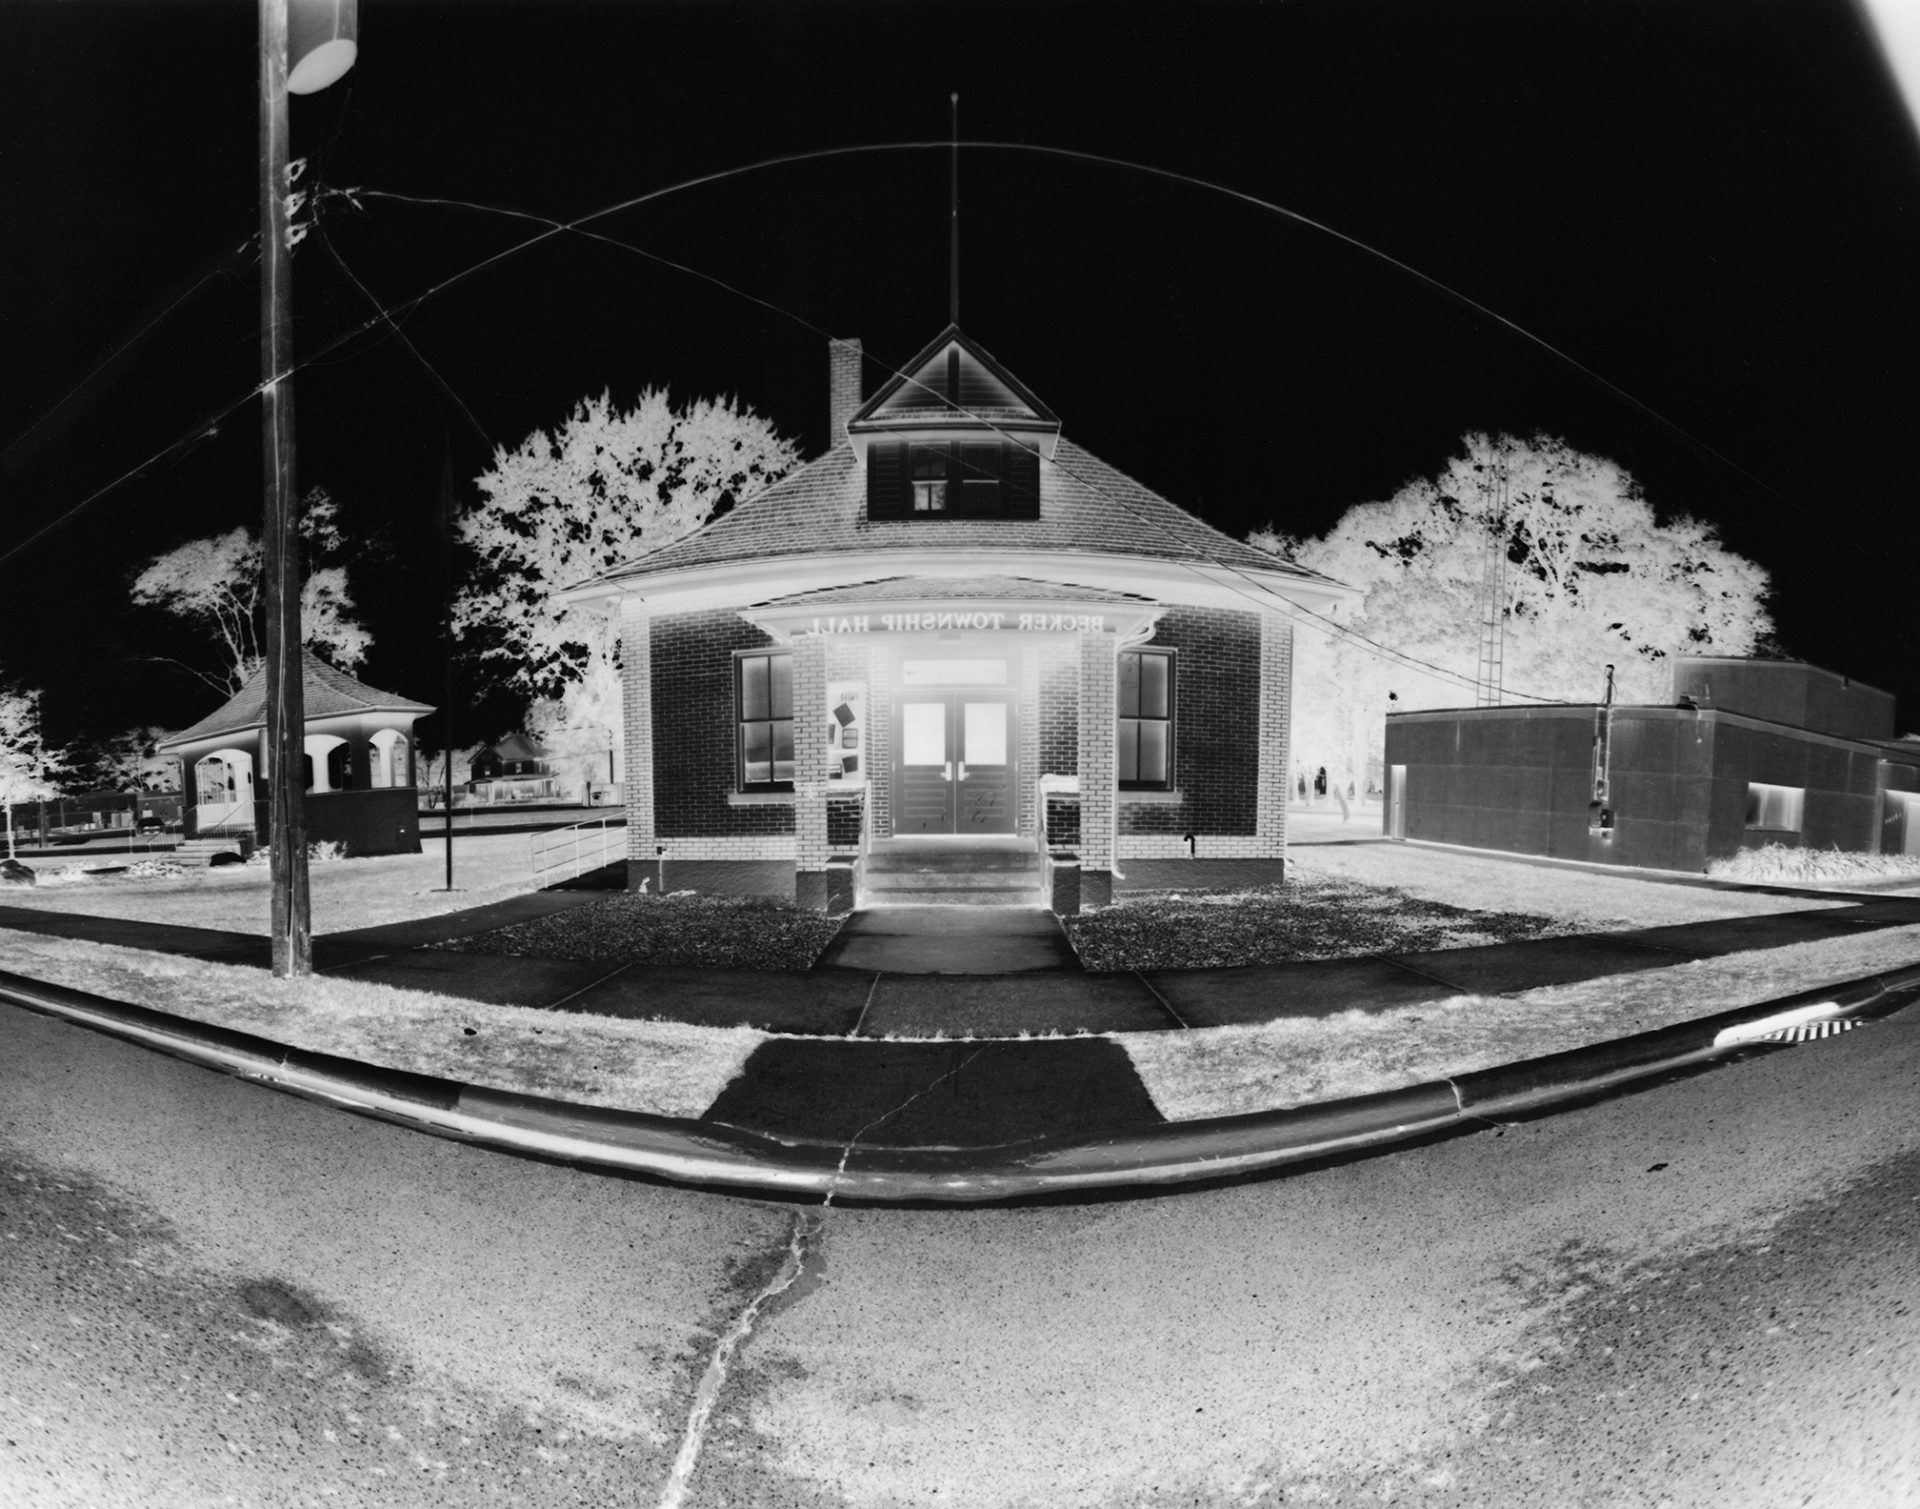 Formal portrait of the Becker Township hall in Sherburne County.